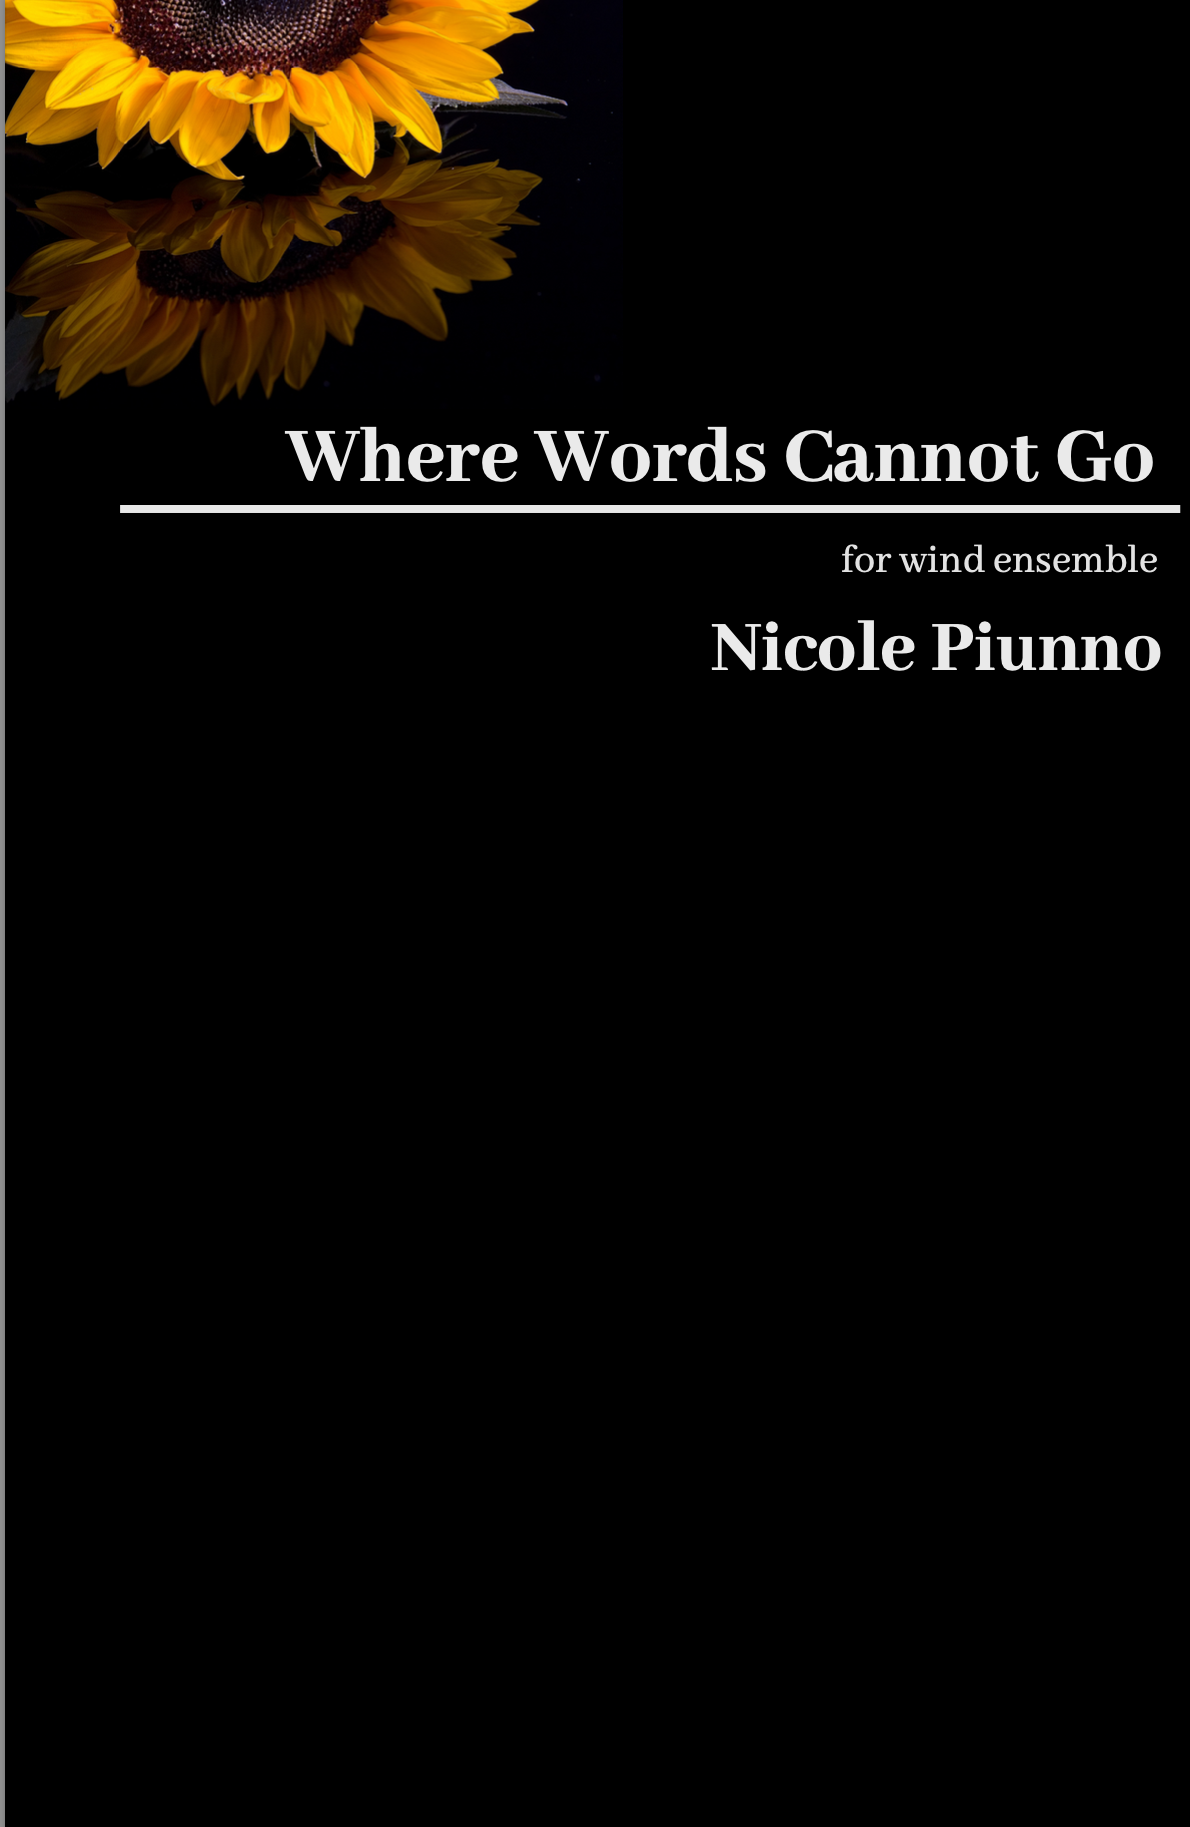 Where Words Cannot Go (Score Only) by Nicole Piunno